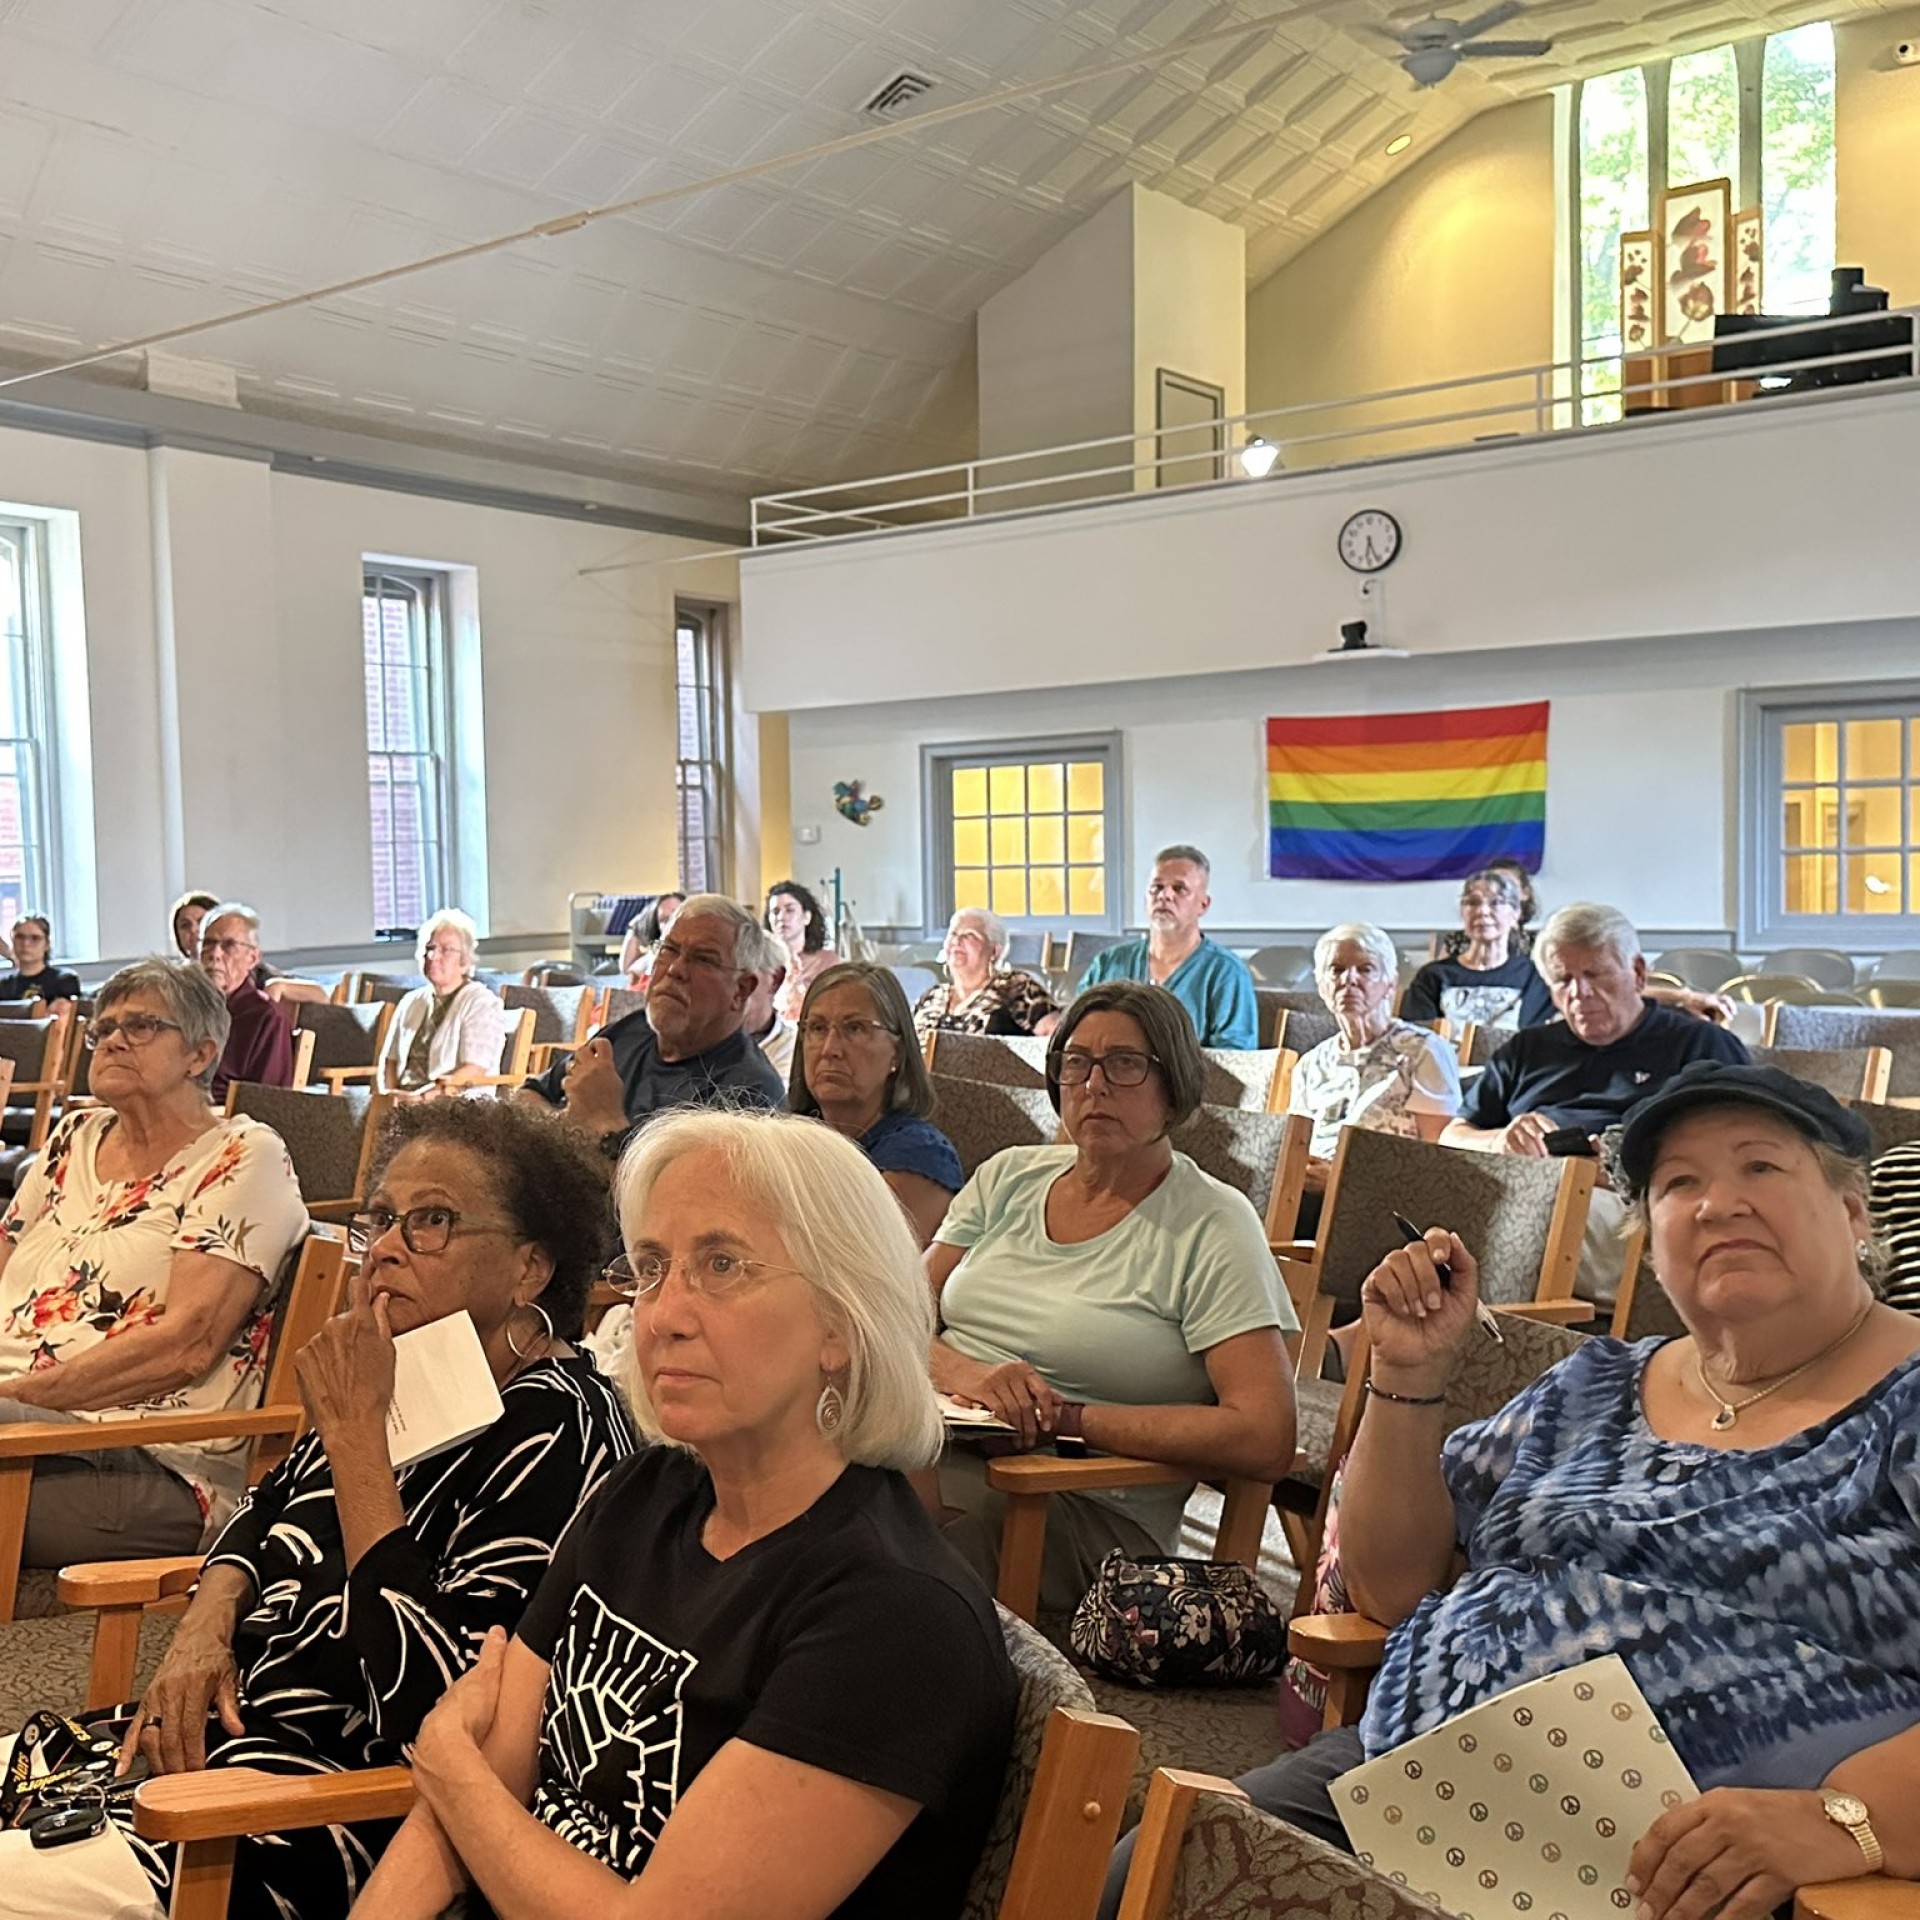 An audience watches No Way Home with a rainbow flag hanging on the back wall